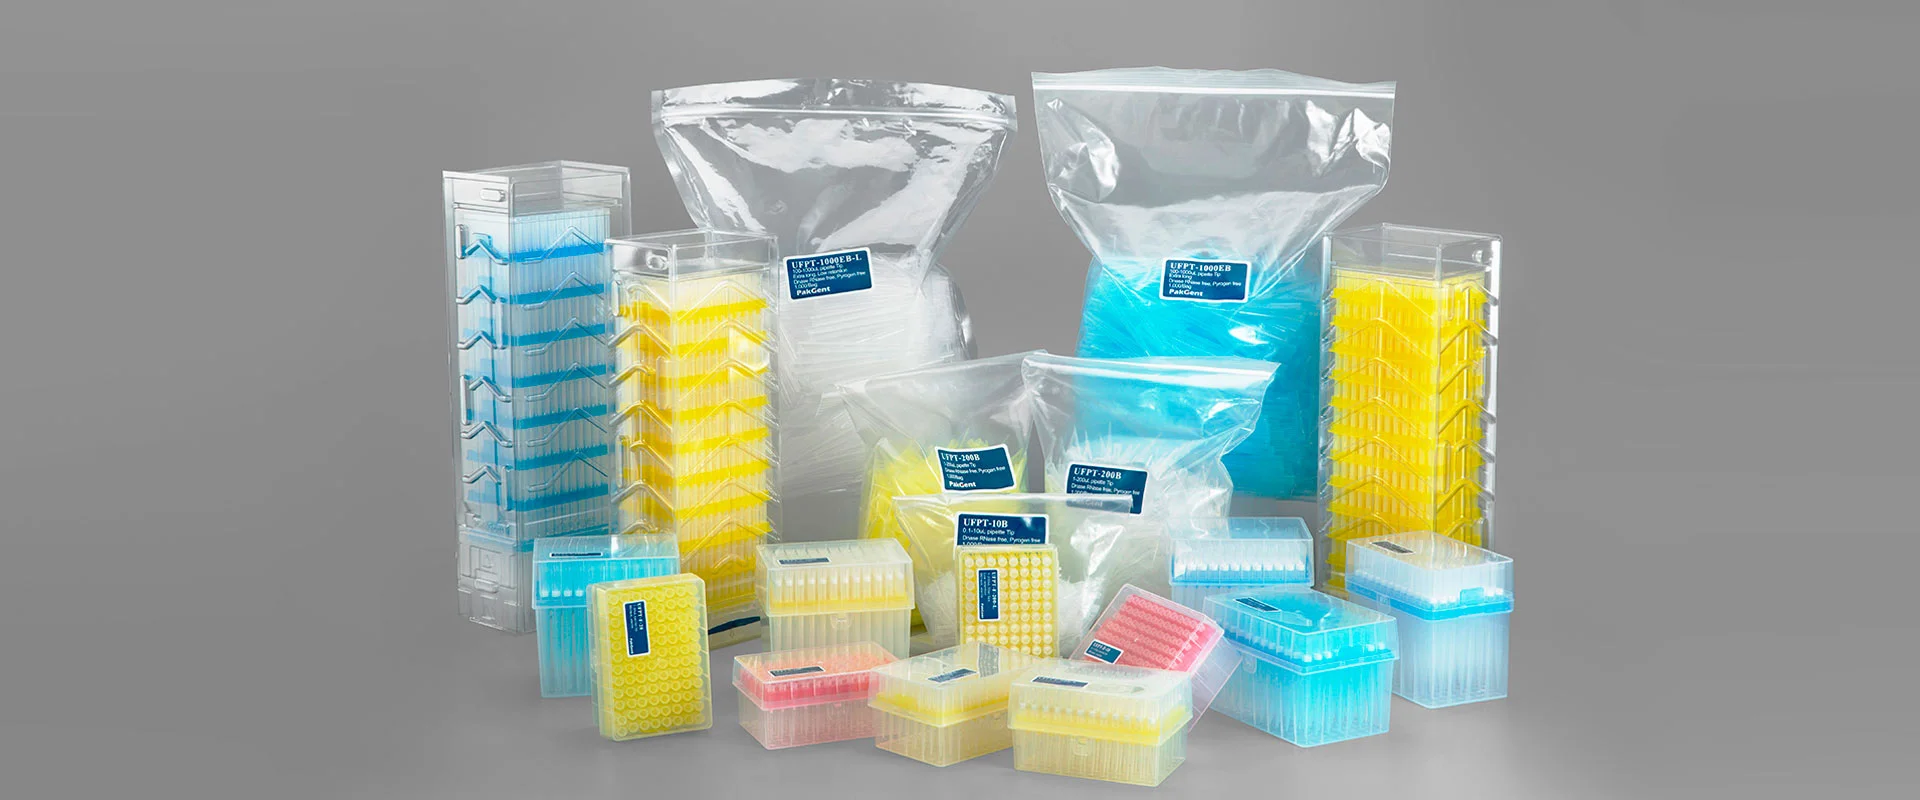 Hospital Consumables Manufacturers